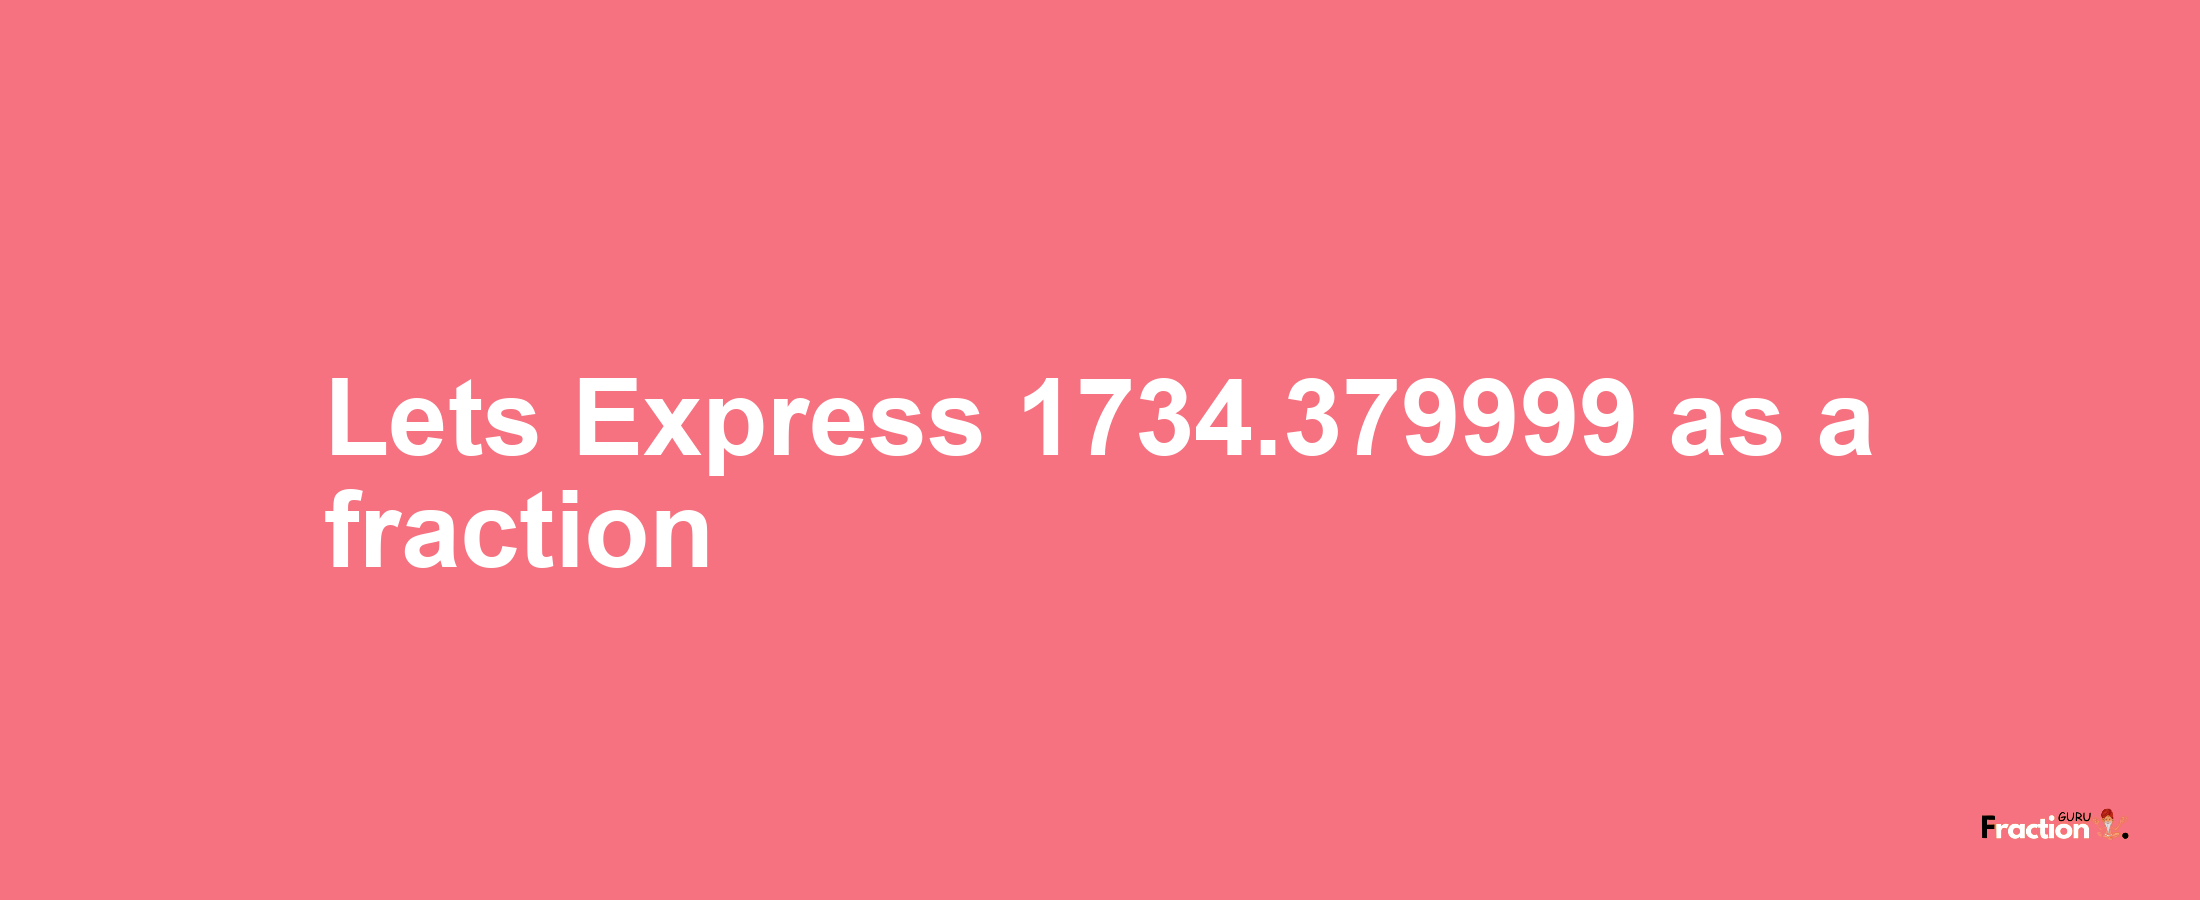 Lets Express 1734.379999 as afraction